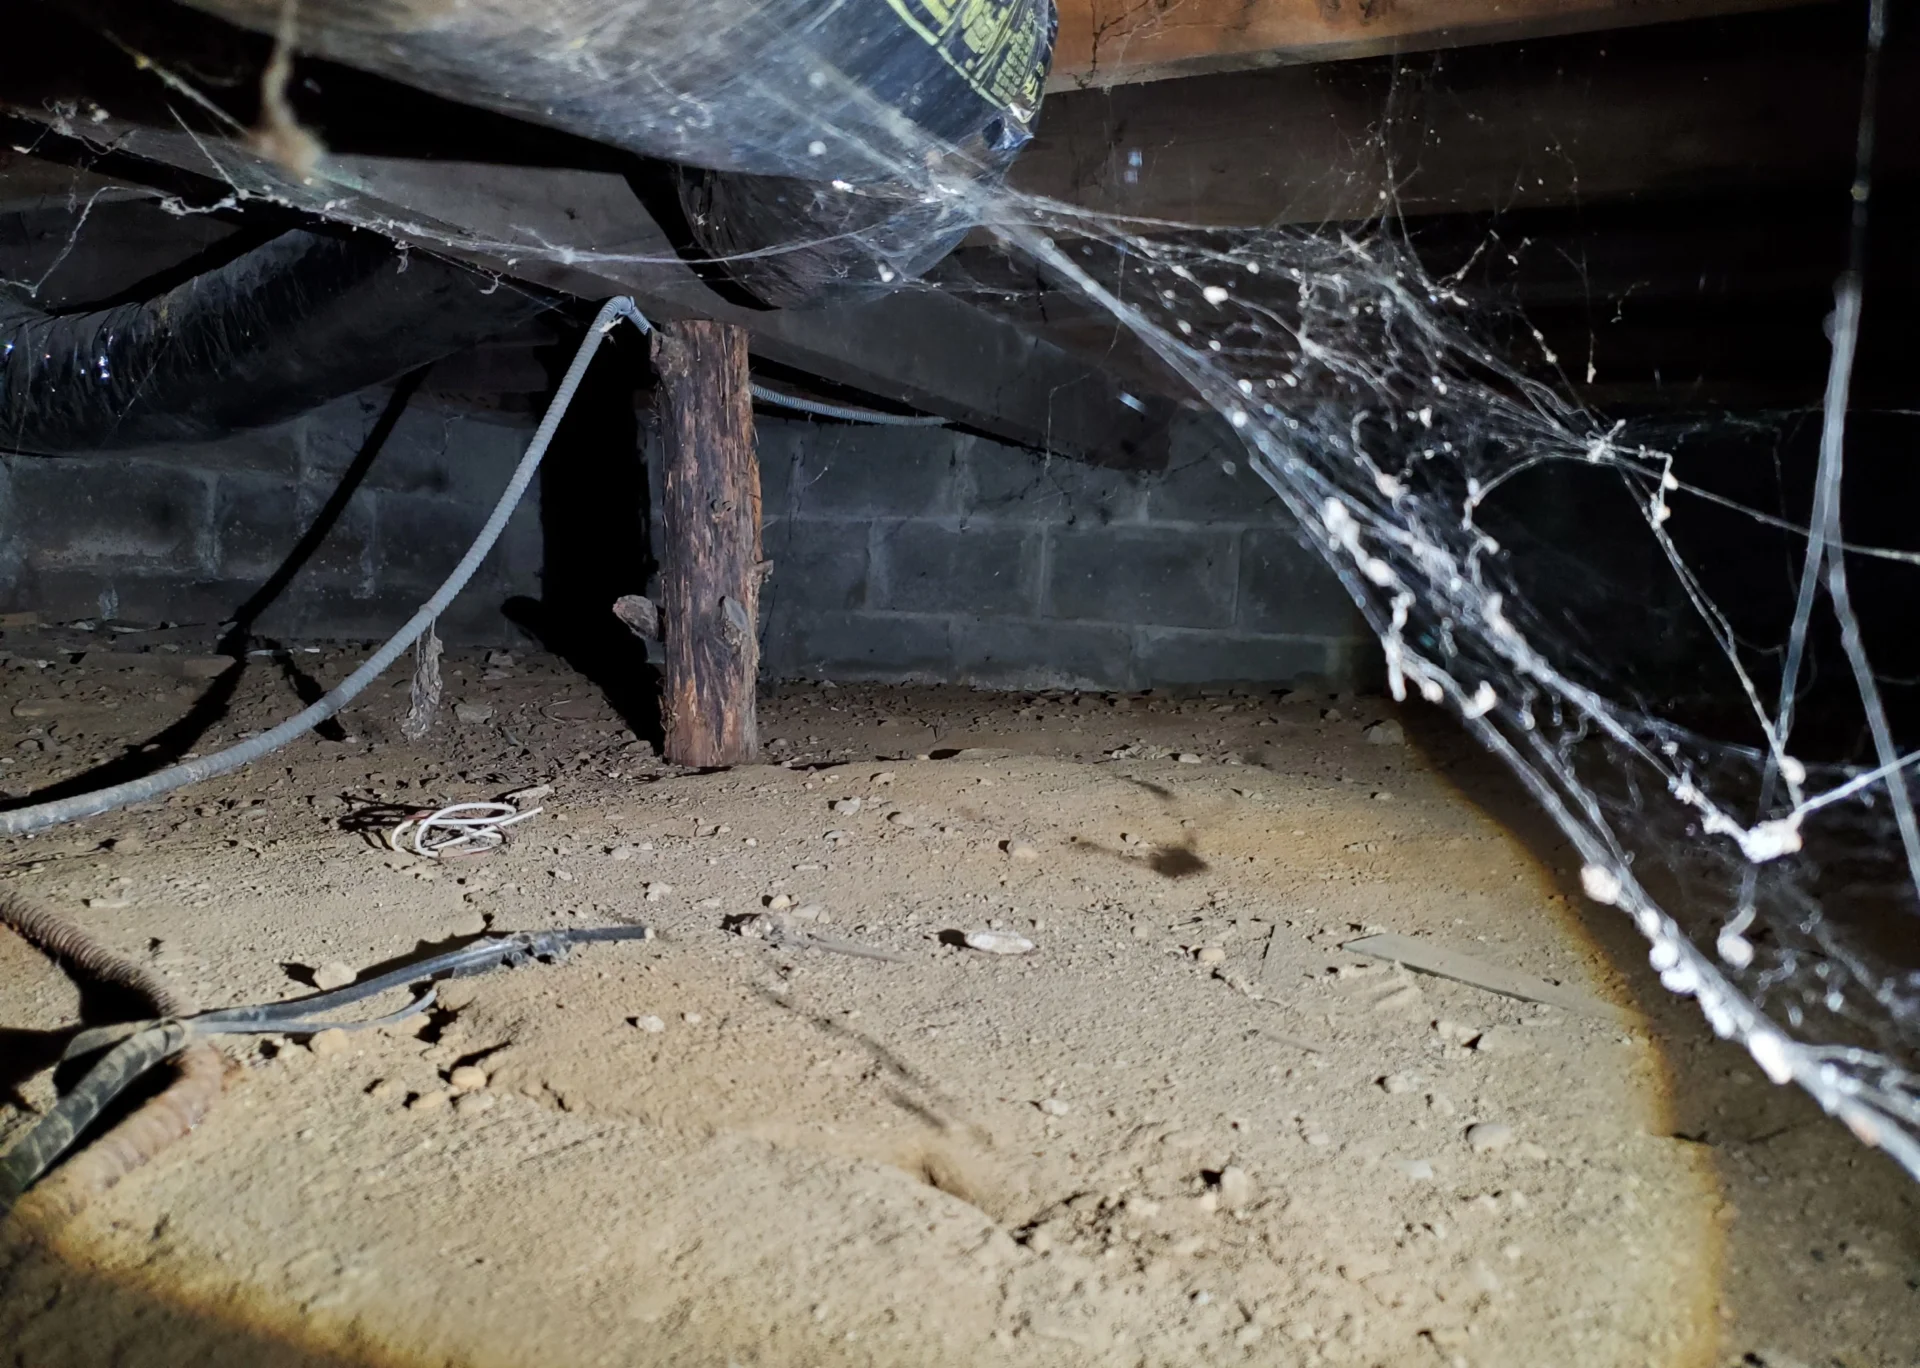 A spider web in the middle of an unfinished floor.